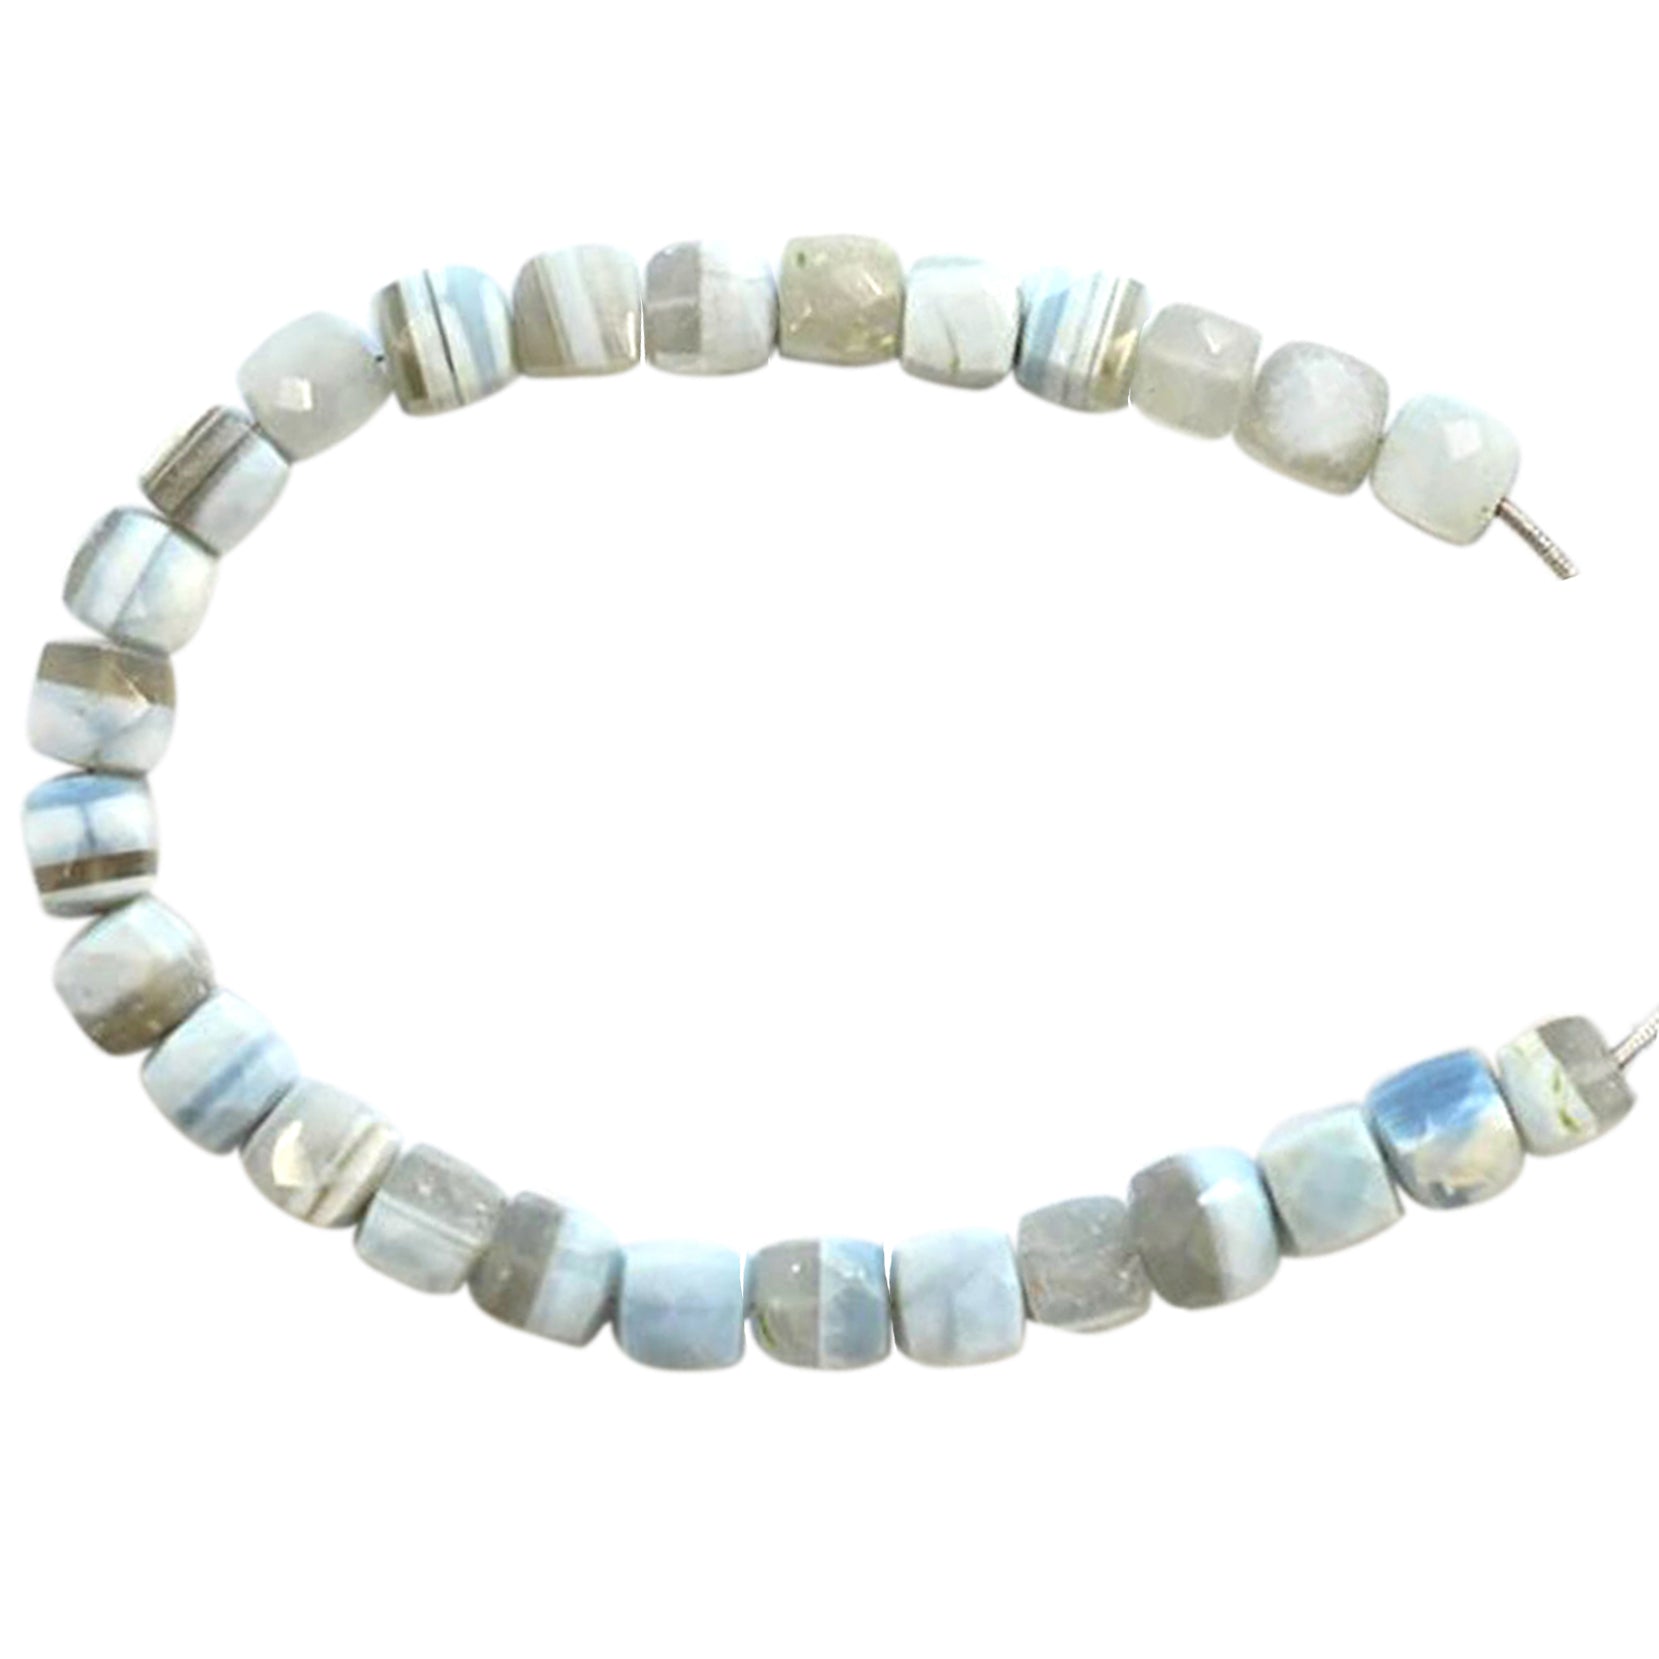 Blue Lace Agate 7 To 8 MM Faceted Cube Shape Beads Strand